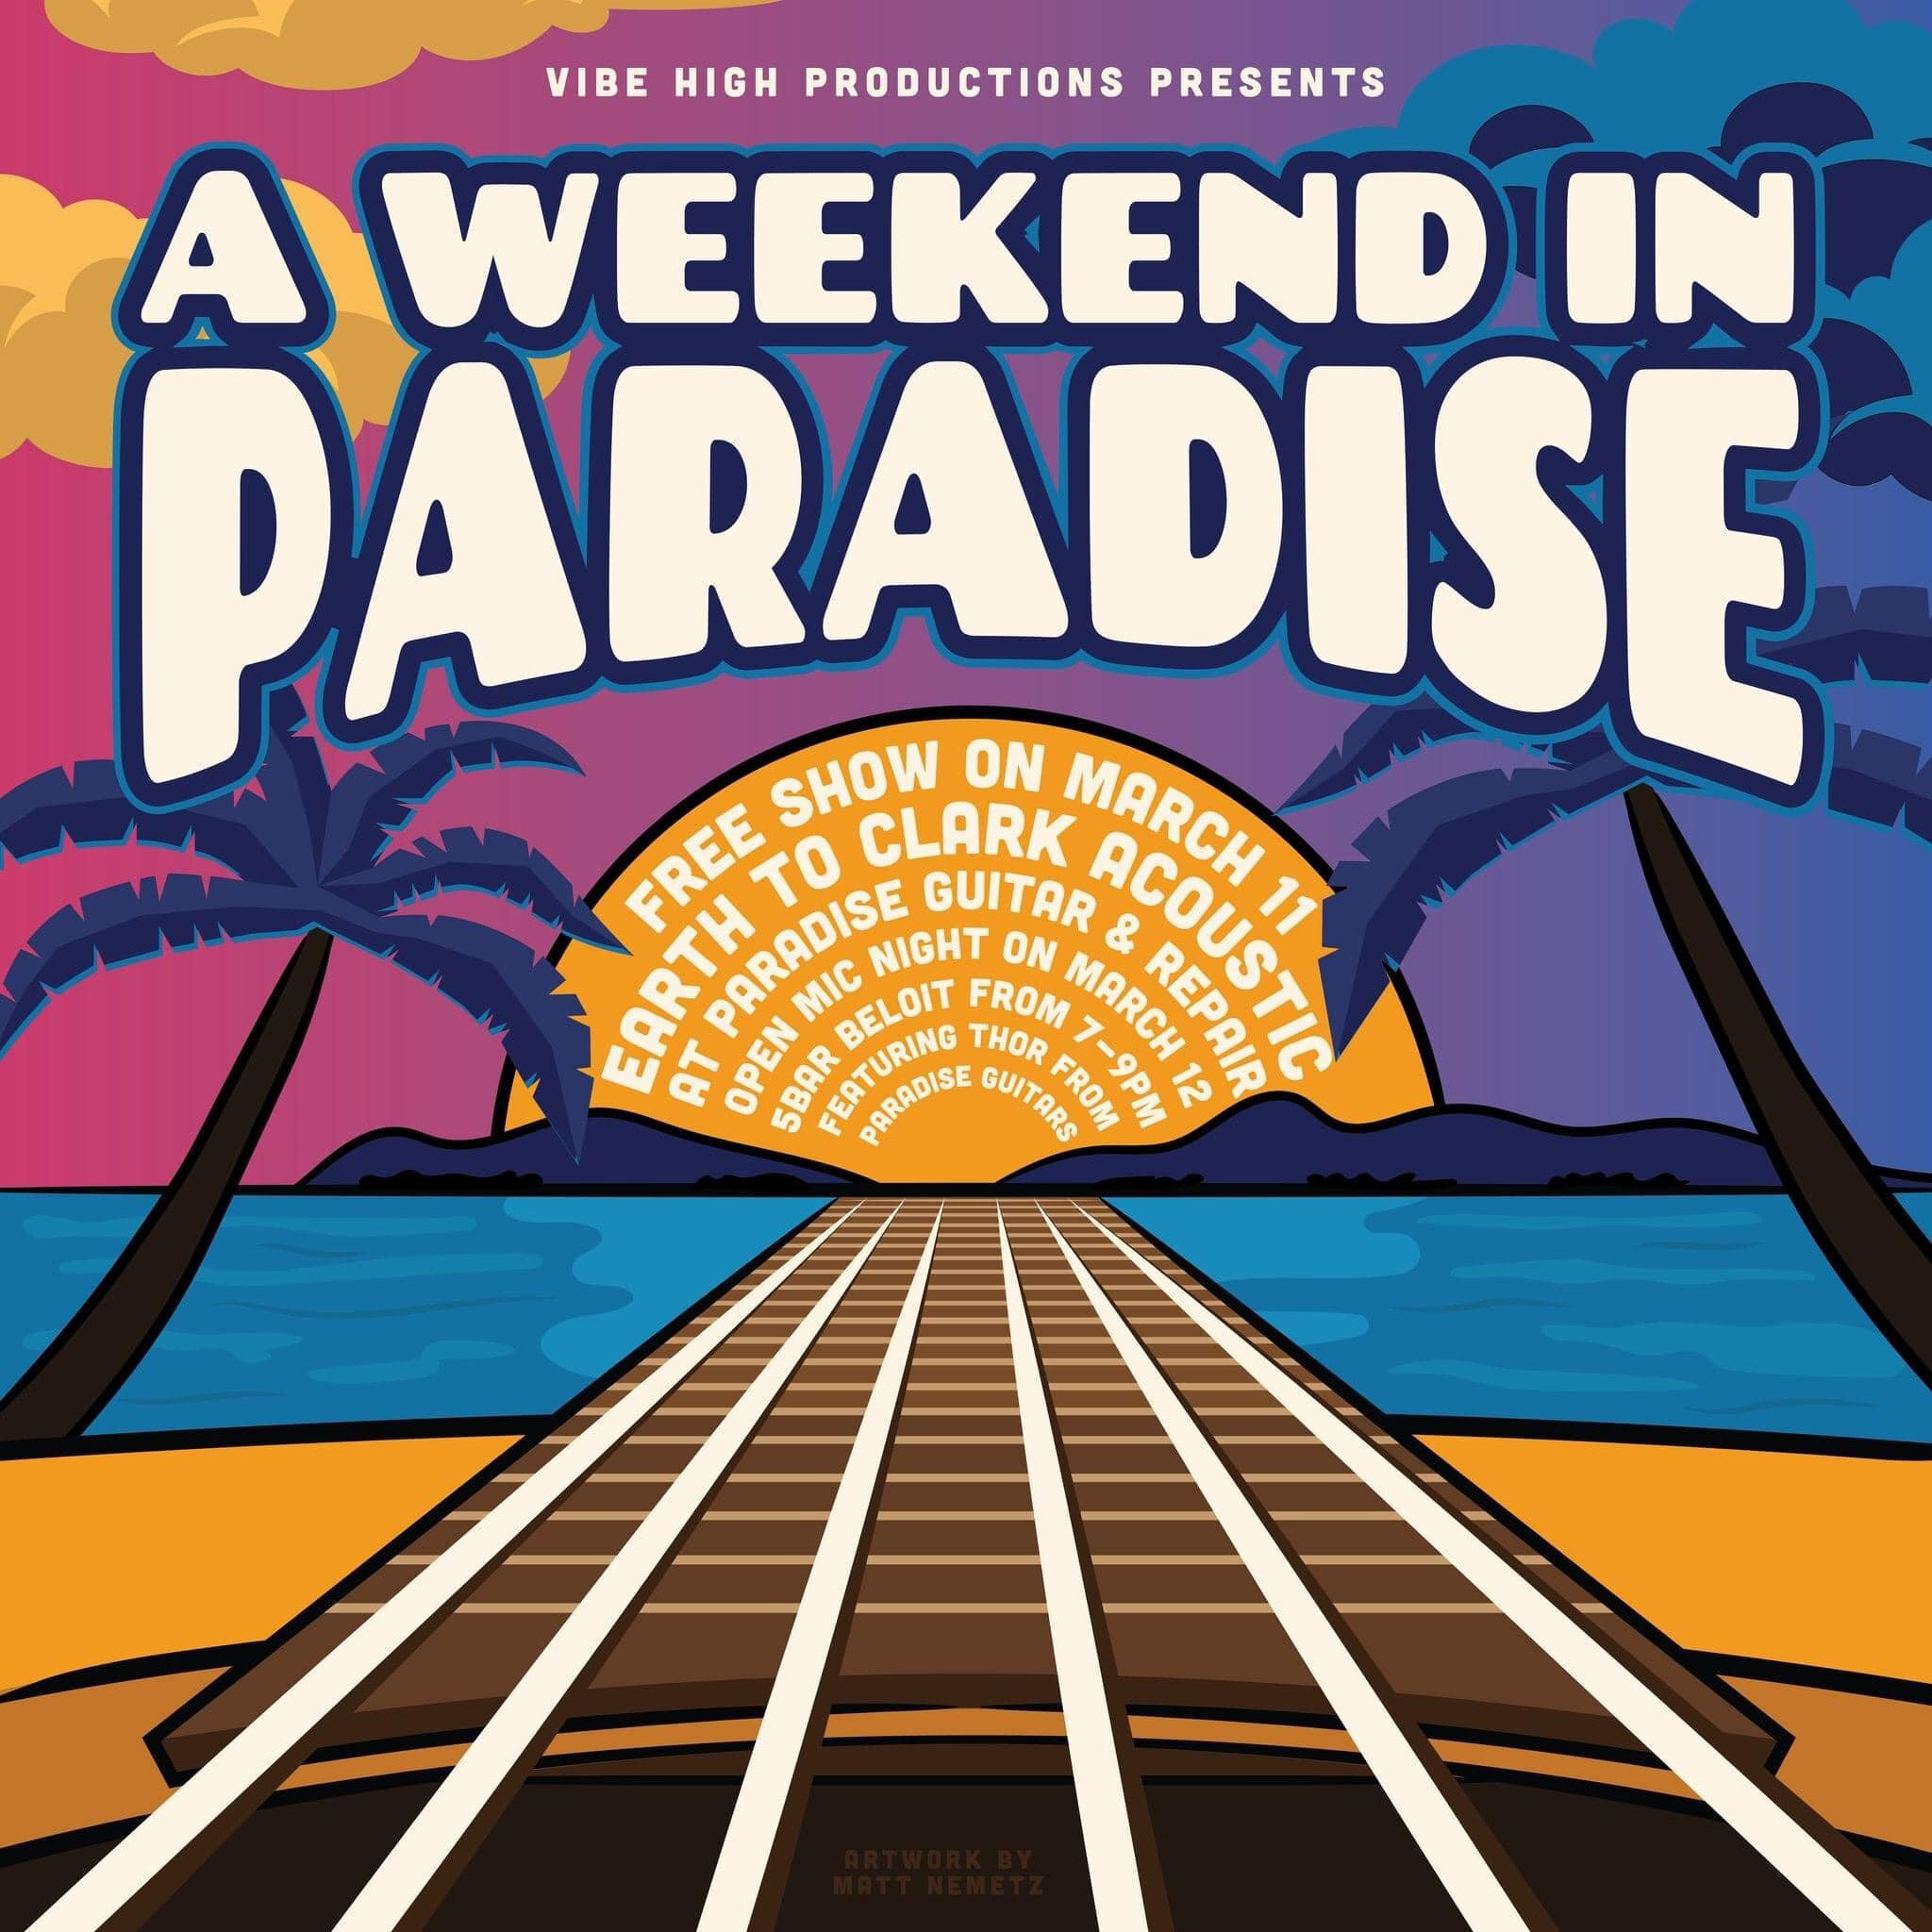 We are one week away from &ldquo;A Weekend in Paradise!&rdquo; ￼ next Saturday, we will be doing an acoustic set at Paradise Guitar &amp; Repair! ￼ we will have snacks and drinks available for free. Show starts at 3pm. See you there! 🎸🤟🏼🏝️